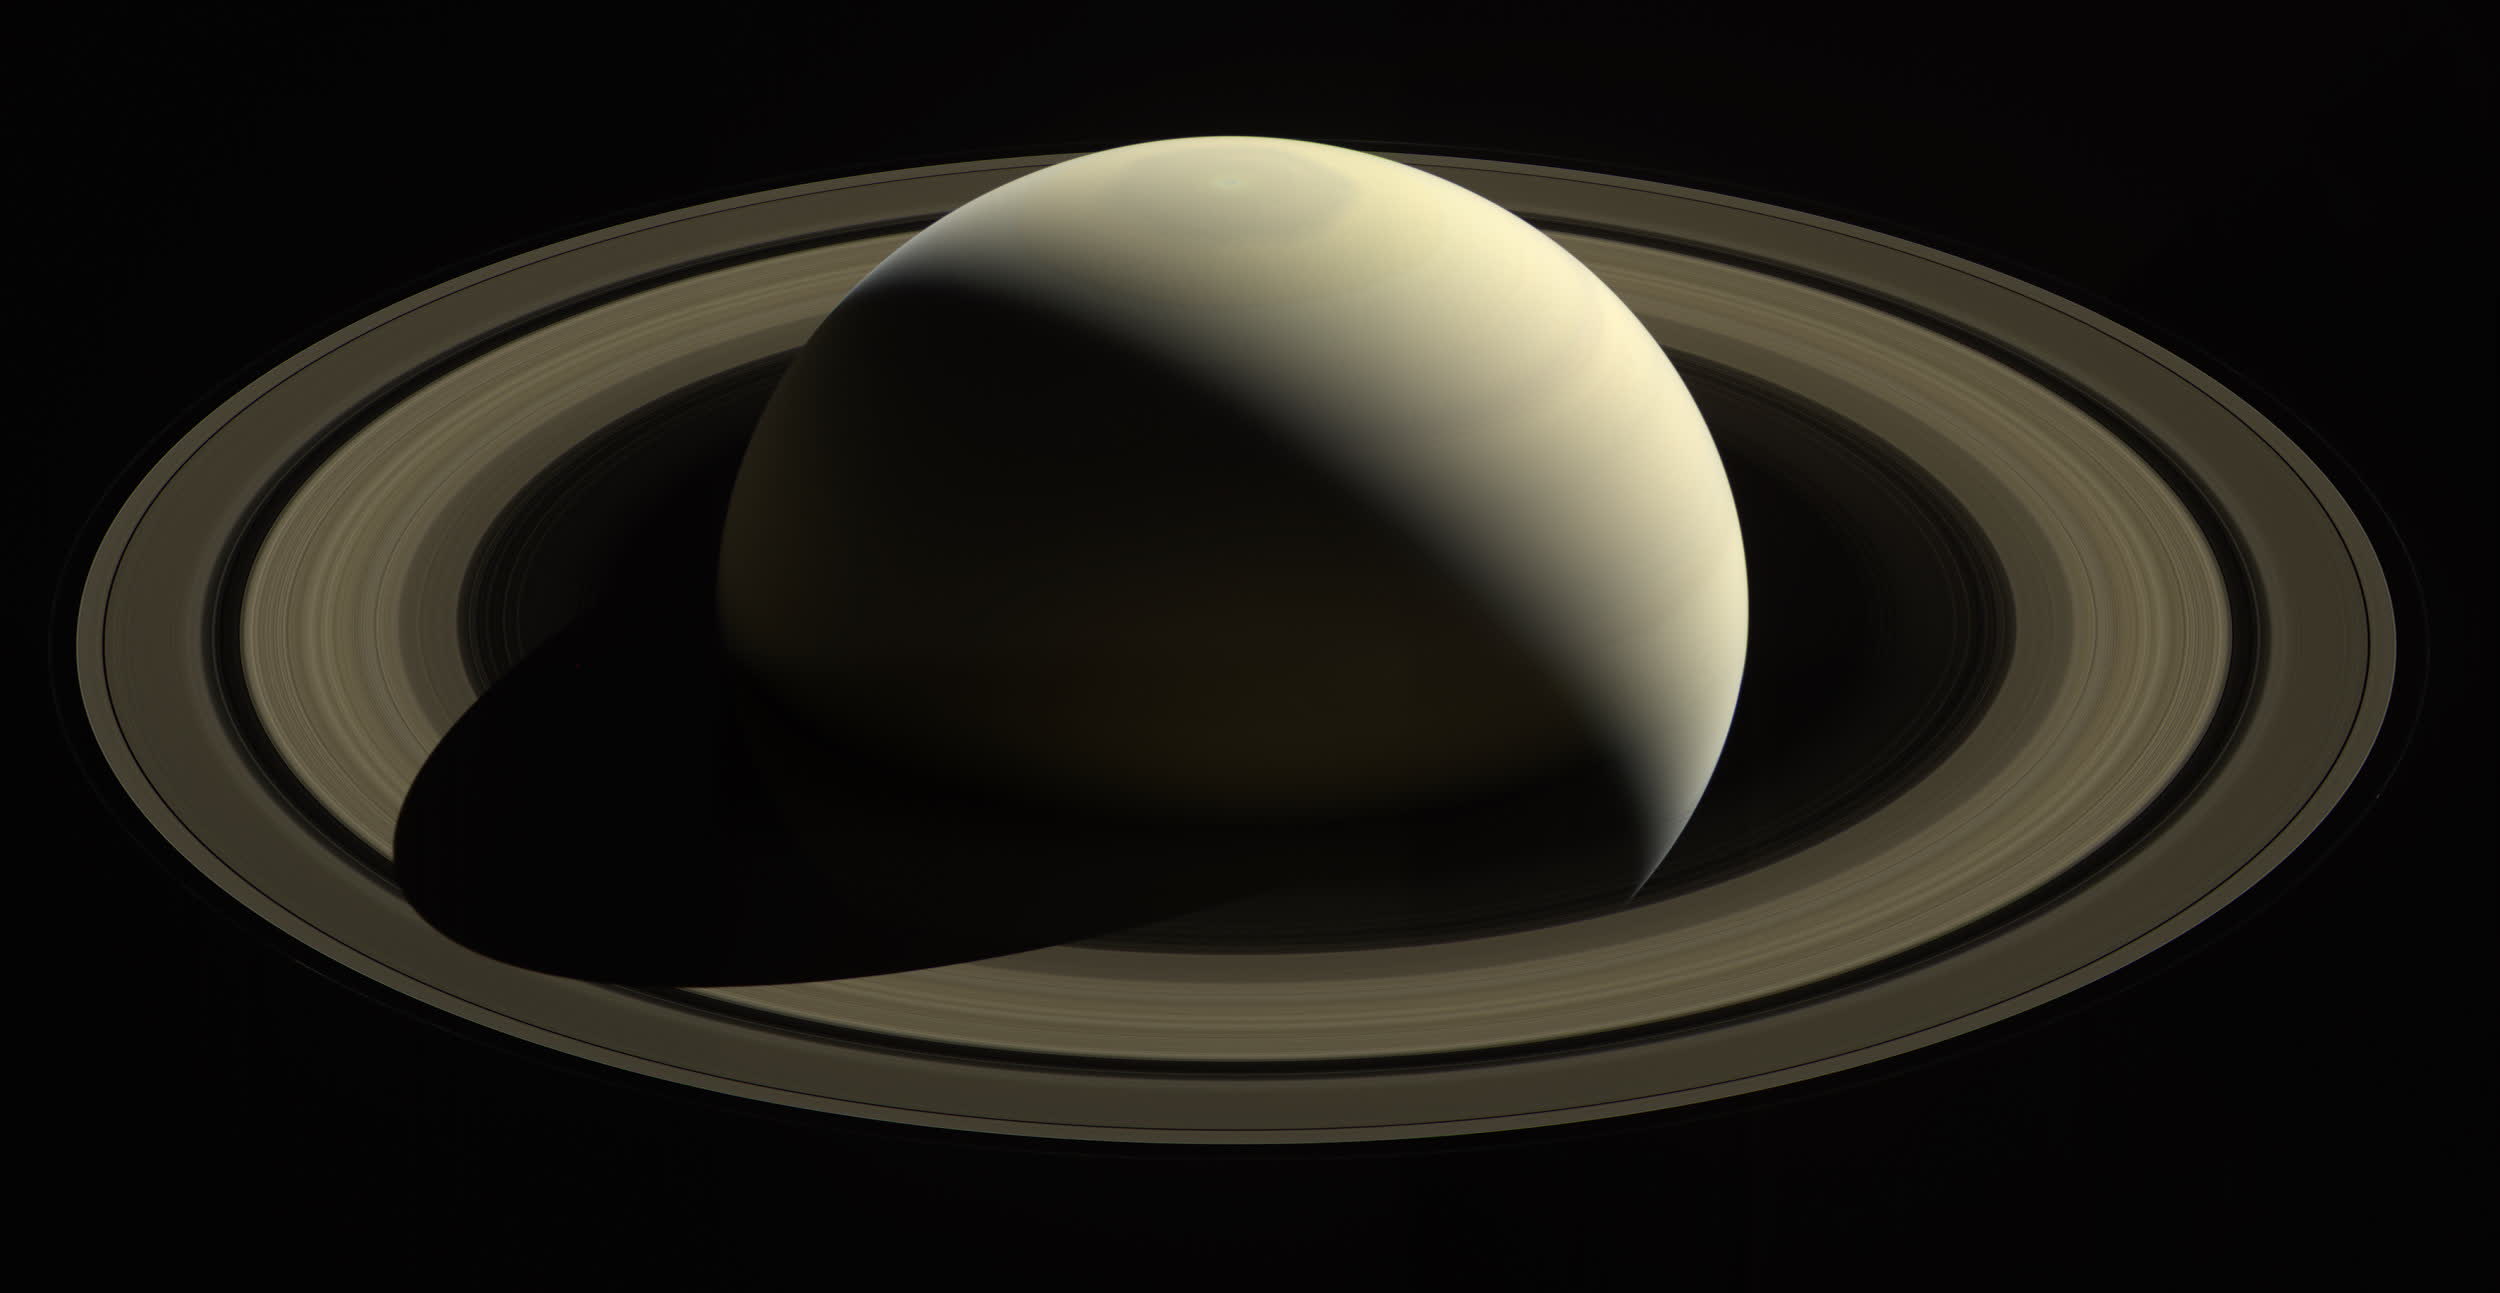 Saturn's rings system is heating up the planet's atmosphere, astronomers discover